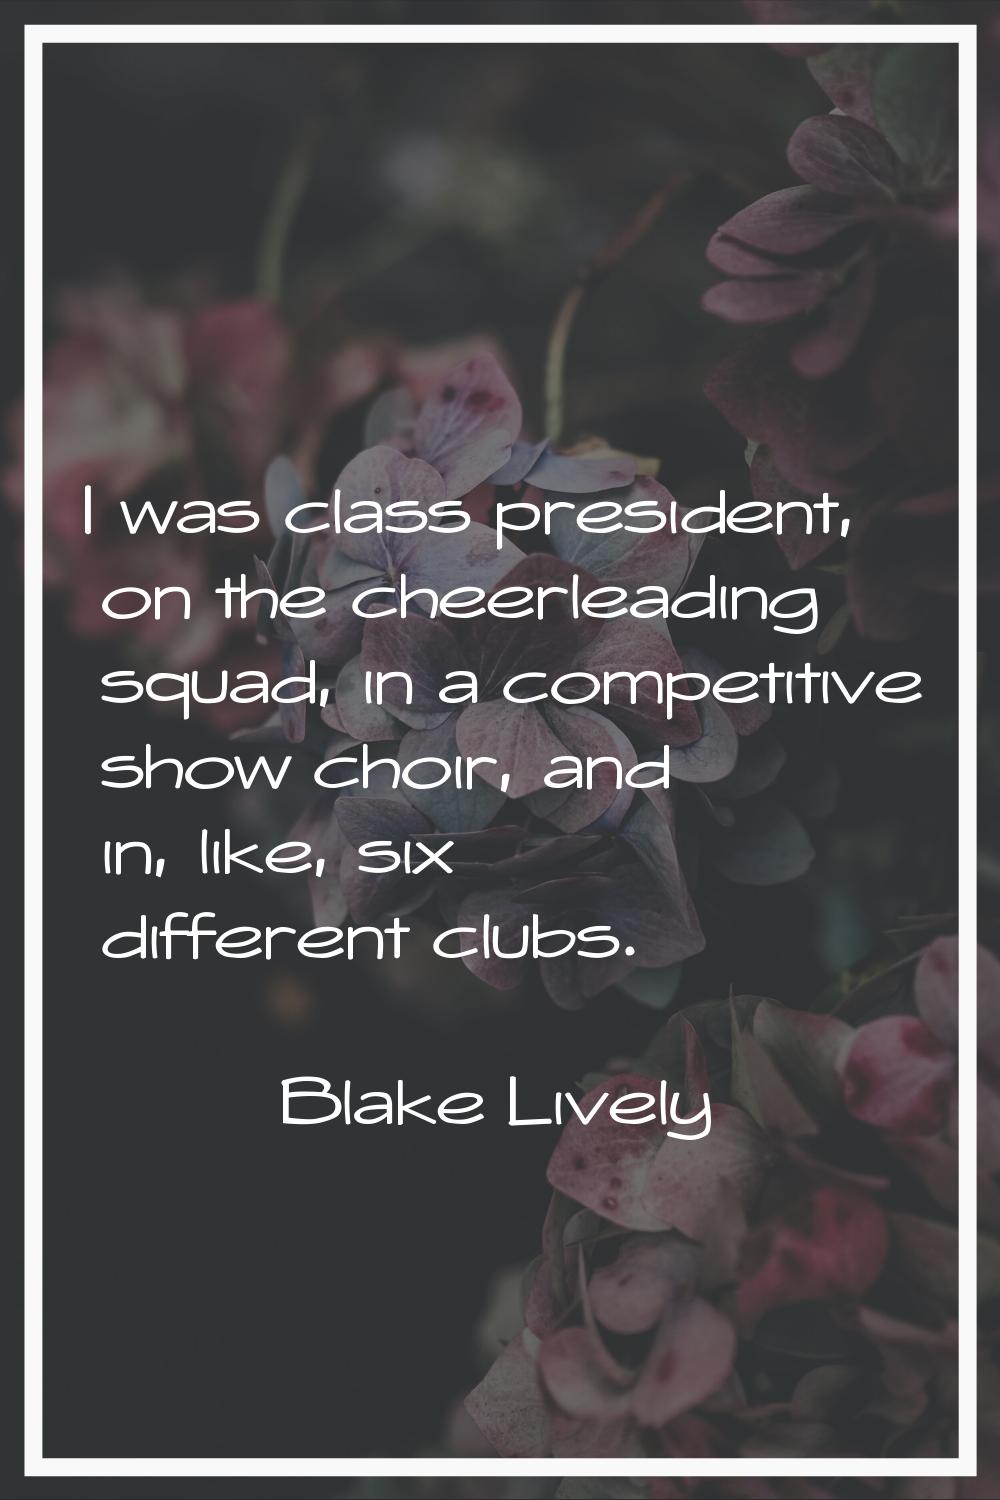 I was class president, on the cheerleading squad, in a competitive show choir, and in, like, six di